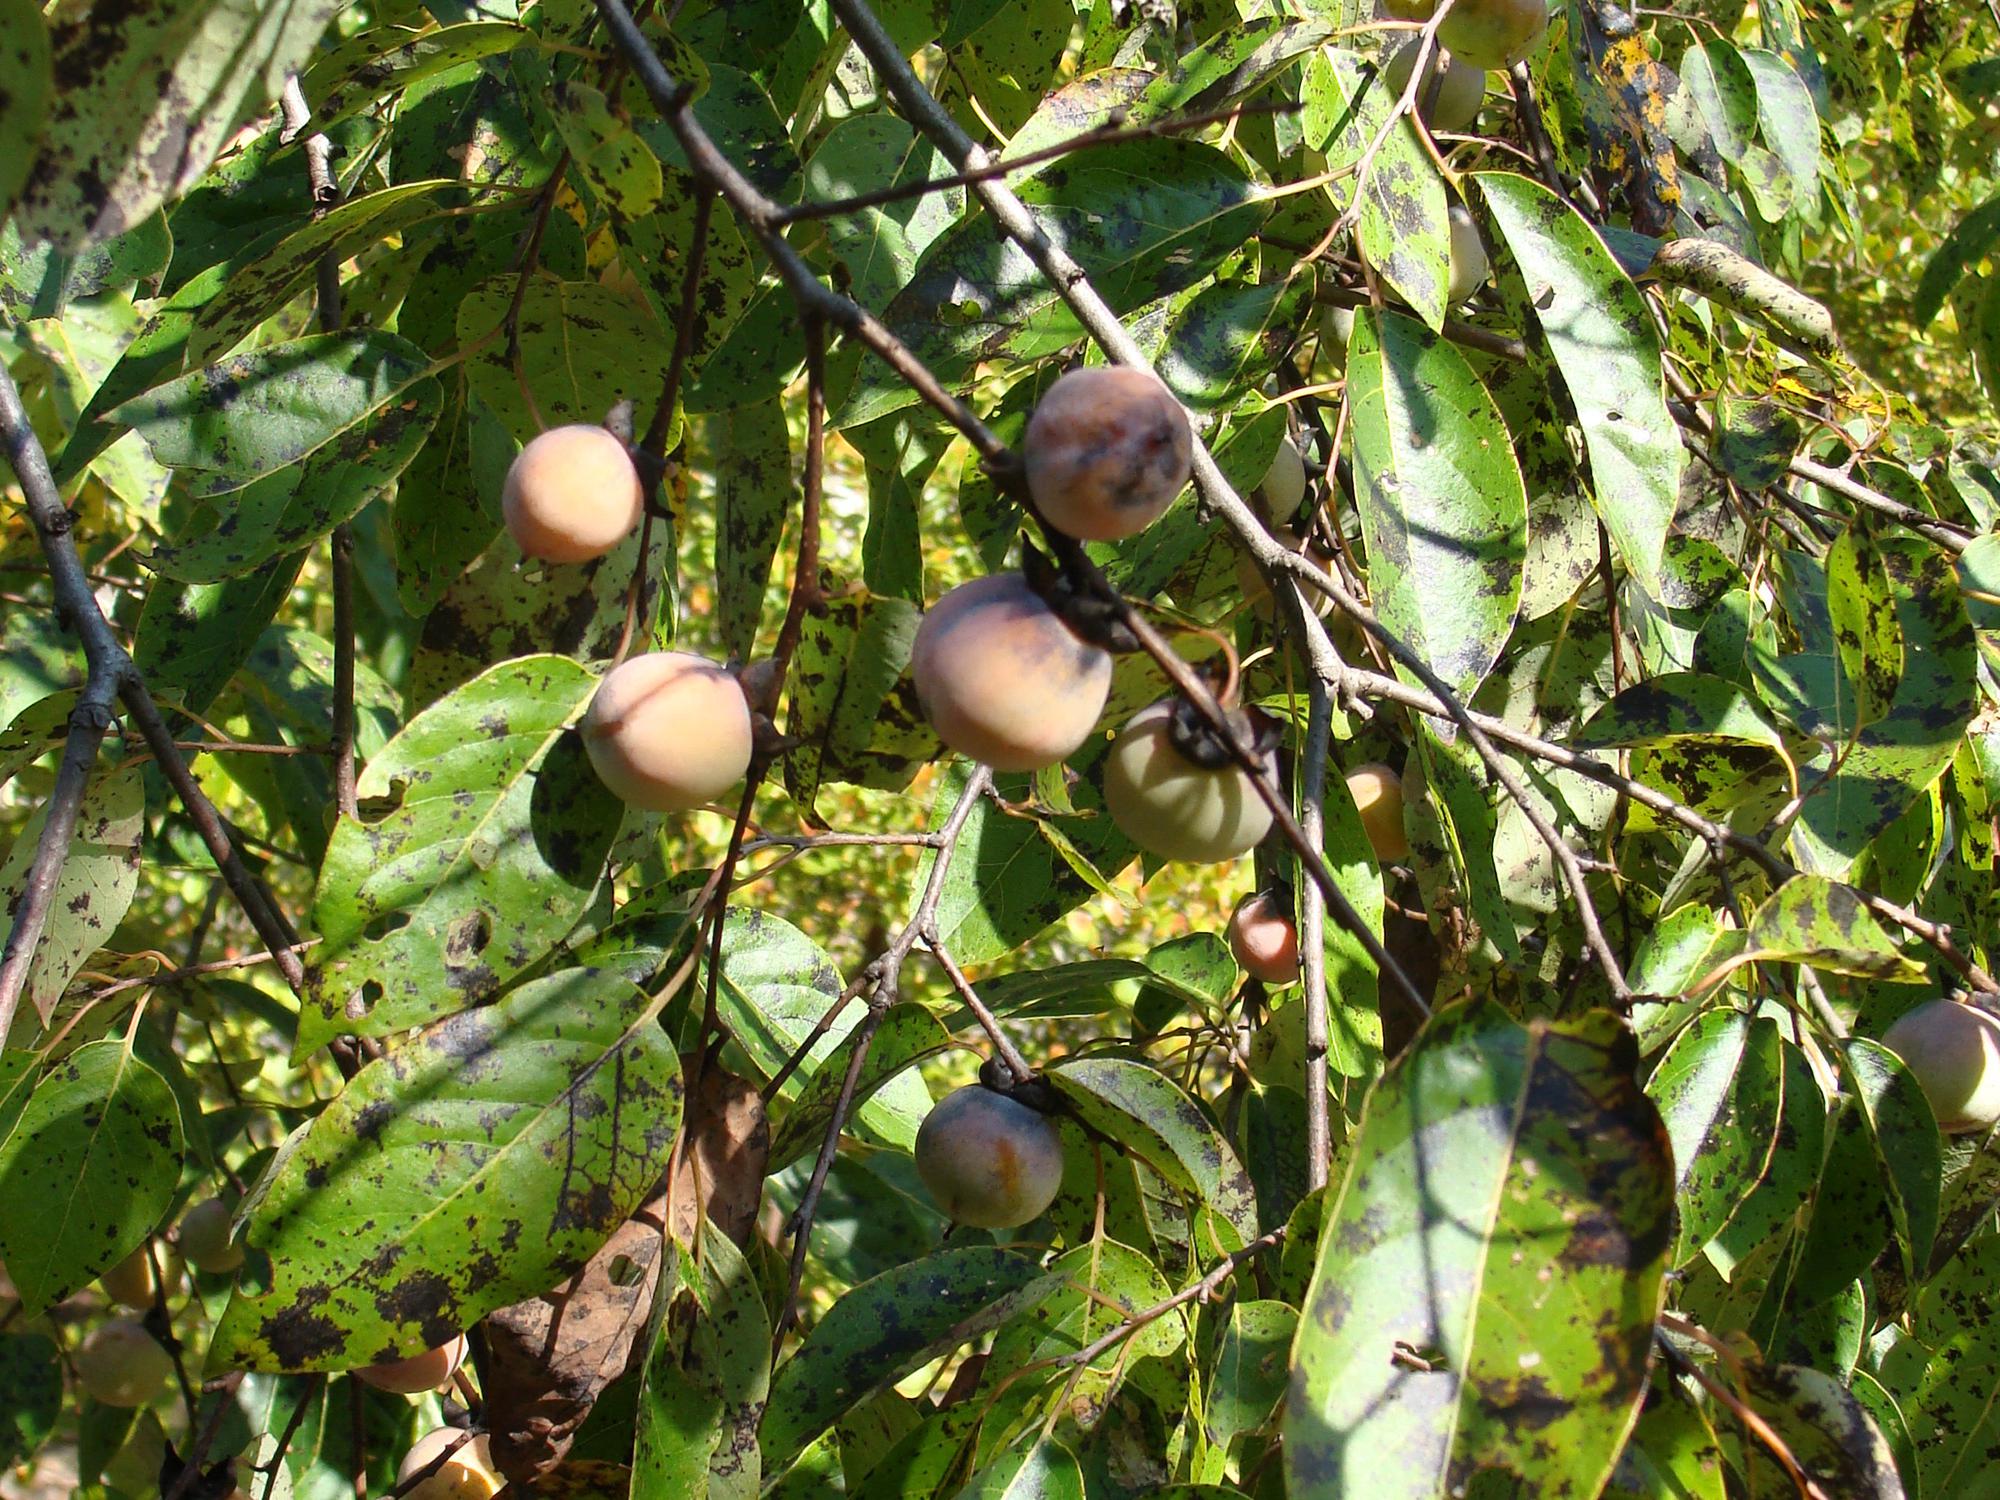 Several ripe persimmons hang from tree branches surrounded by green leaves.